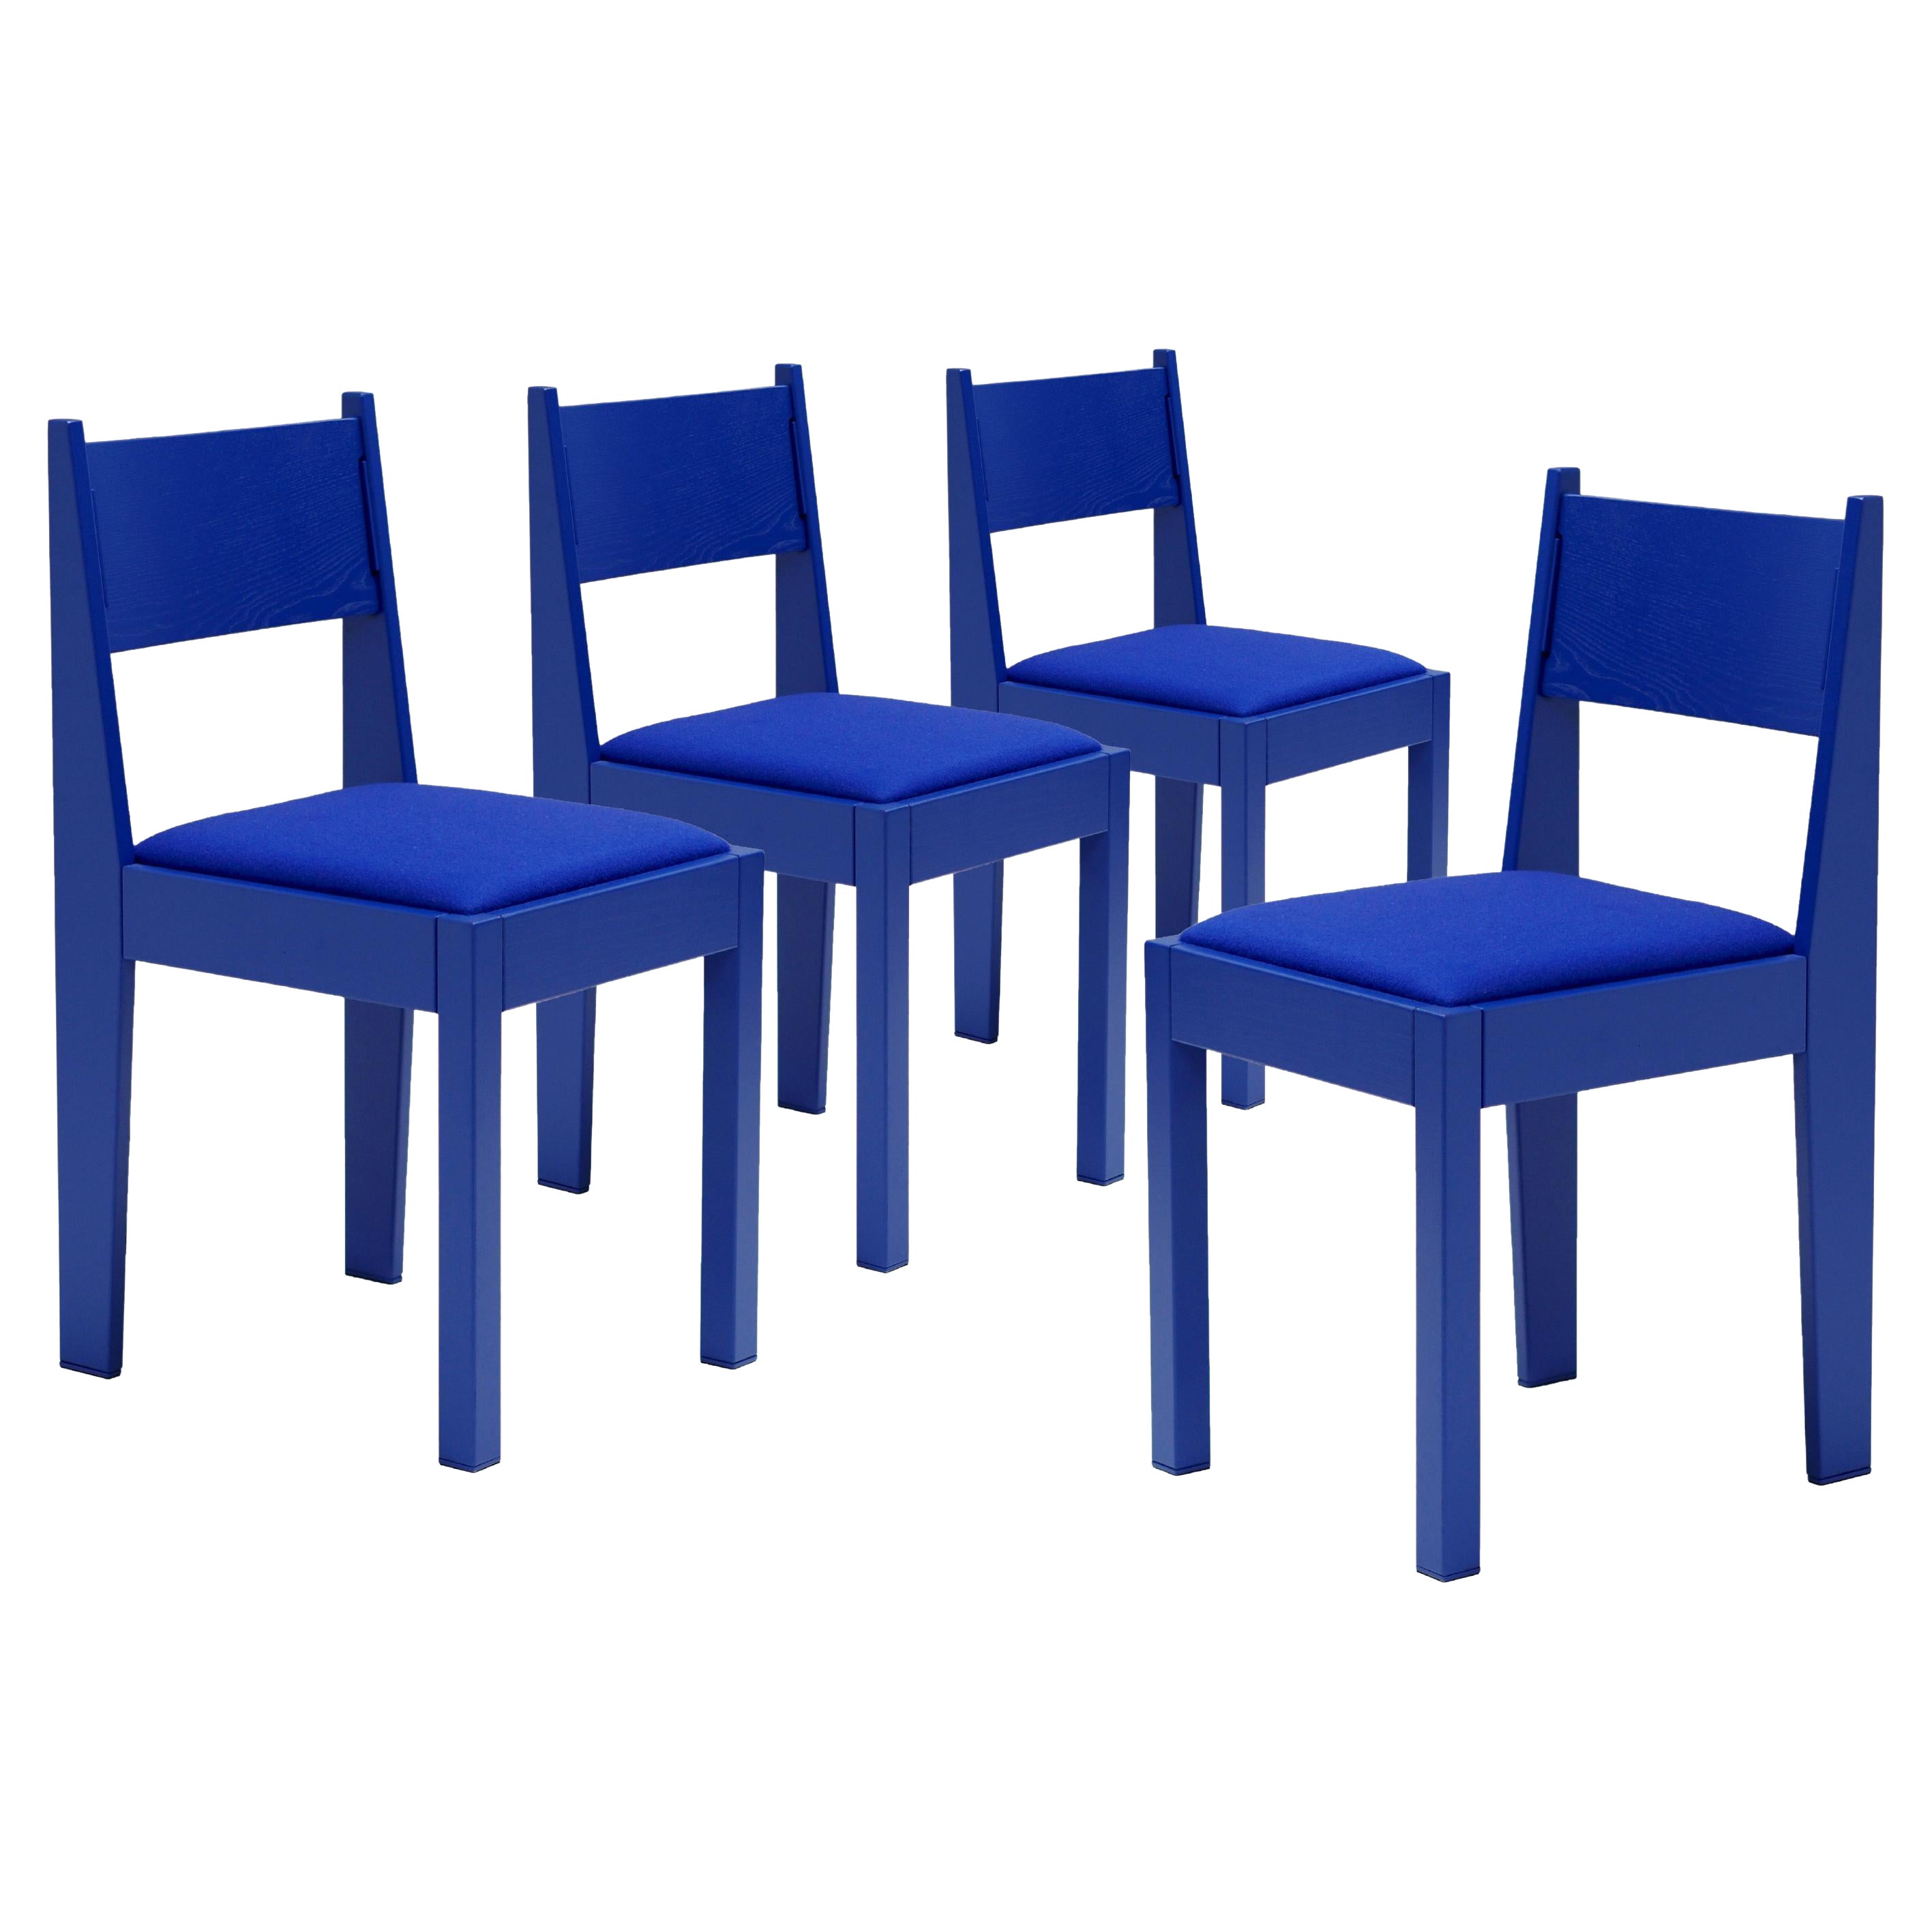 Set of 4 Art Deco Chairs, Special Edition, IKB blue, Customizable